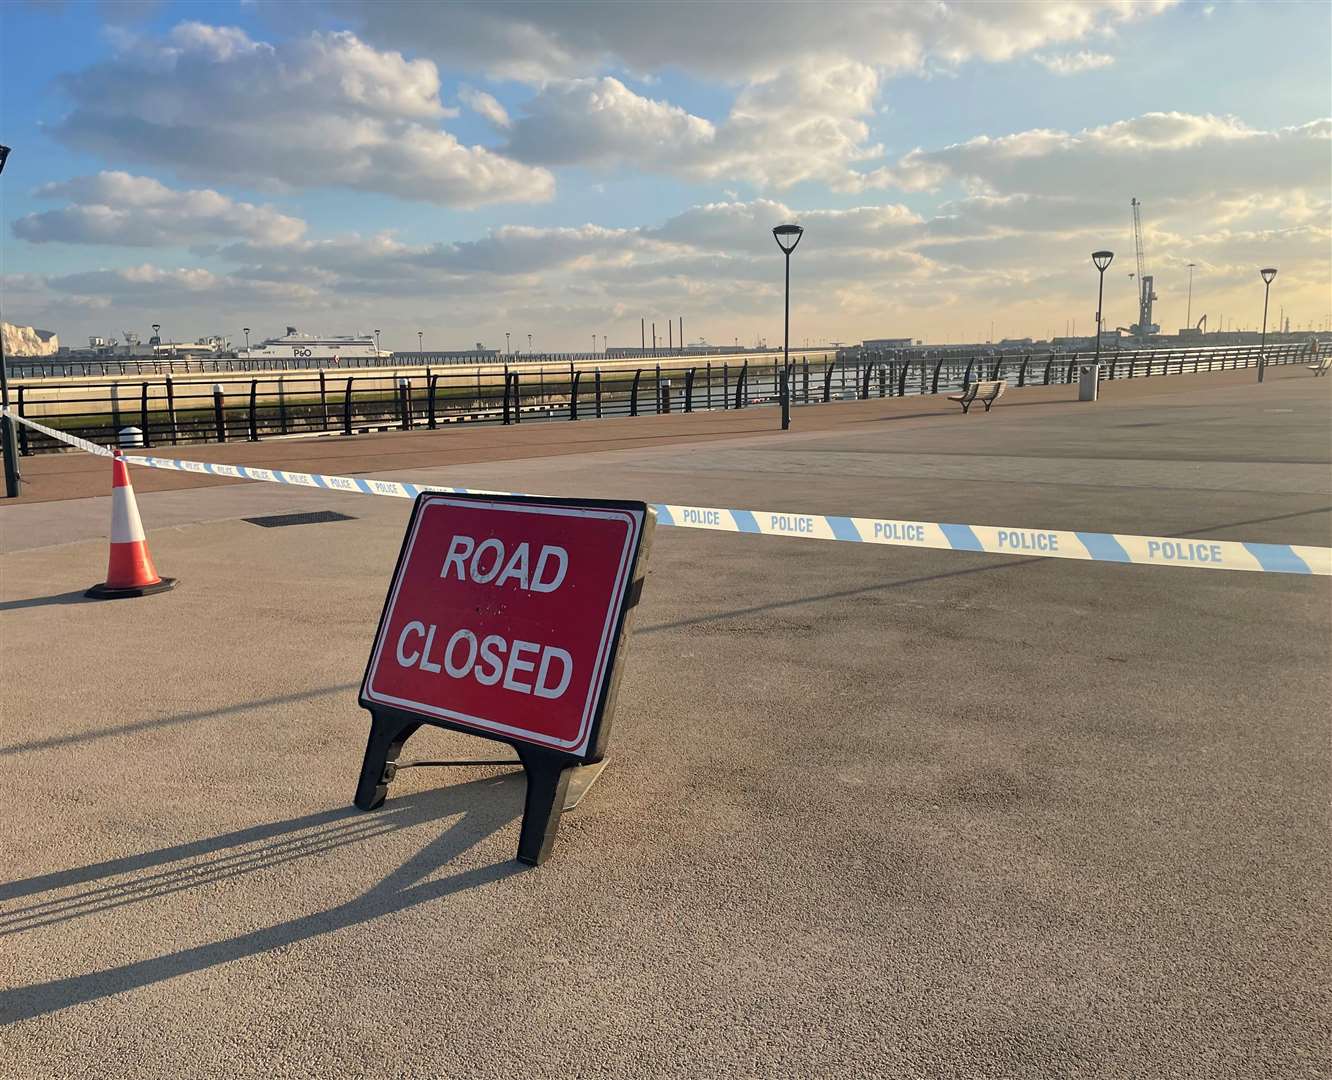 The marina in Dover was taped off following the tragedy